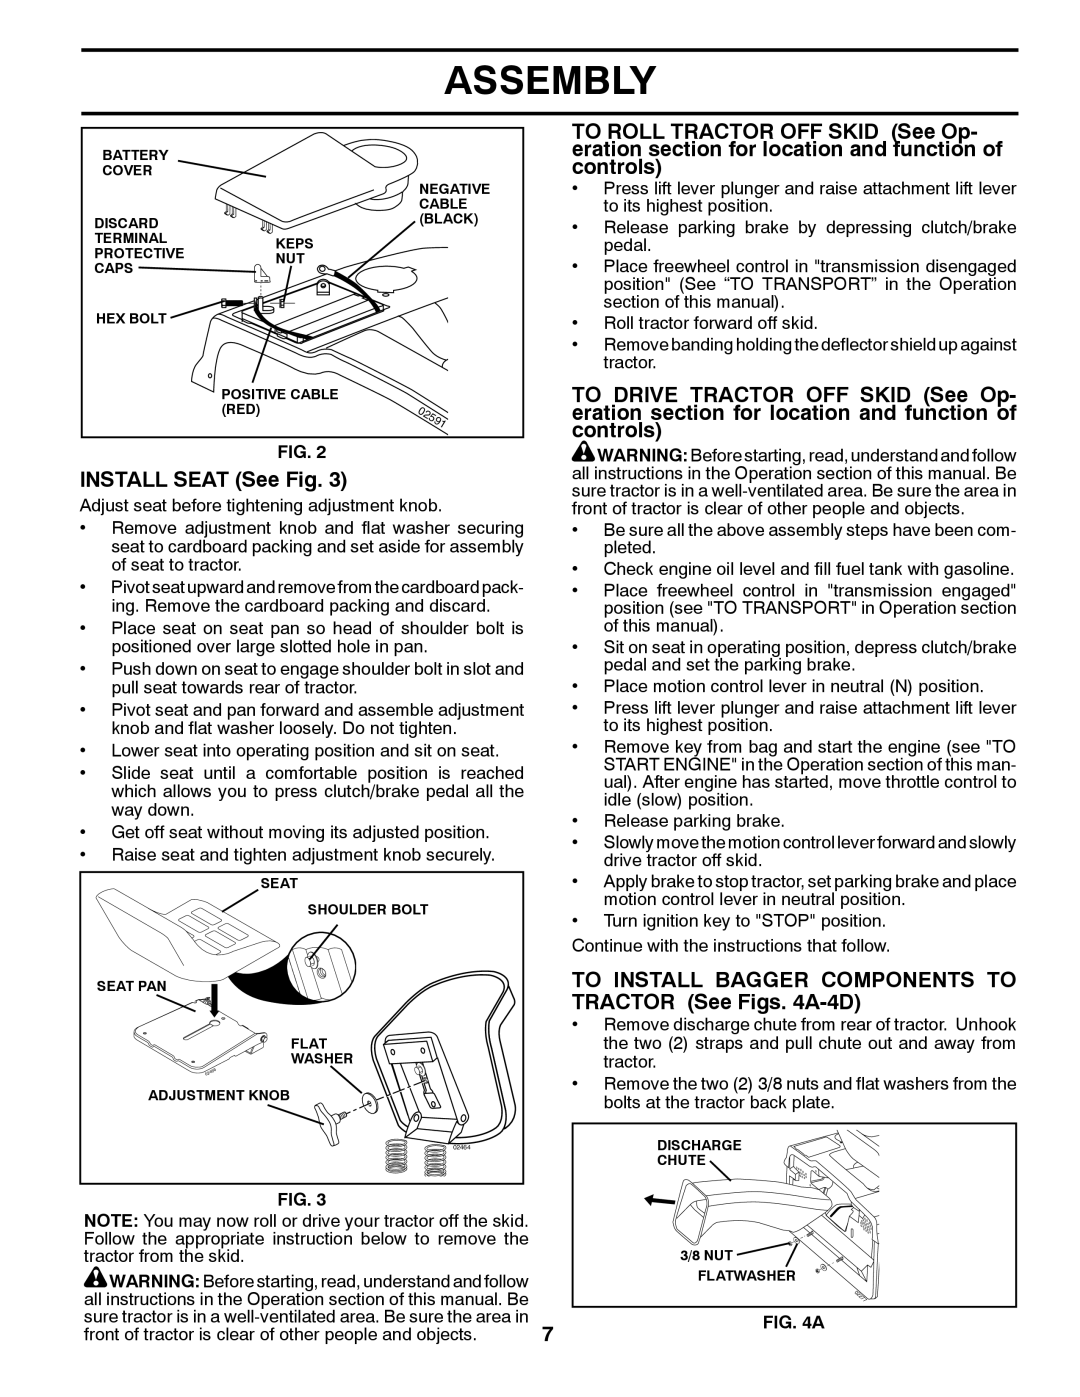 Husqvarna CTH2036 XP owner manual INSTALL SEAT See Fig, To Install Bagger Components To, TRACTOR See Figs. 4A-4D, Assembly 